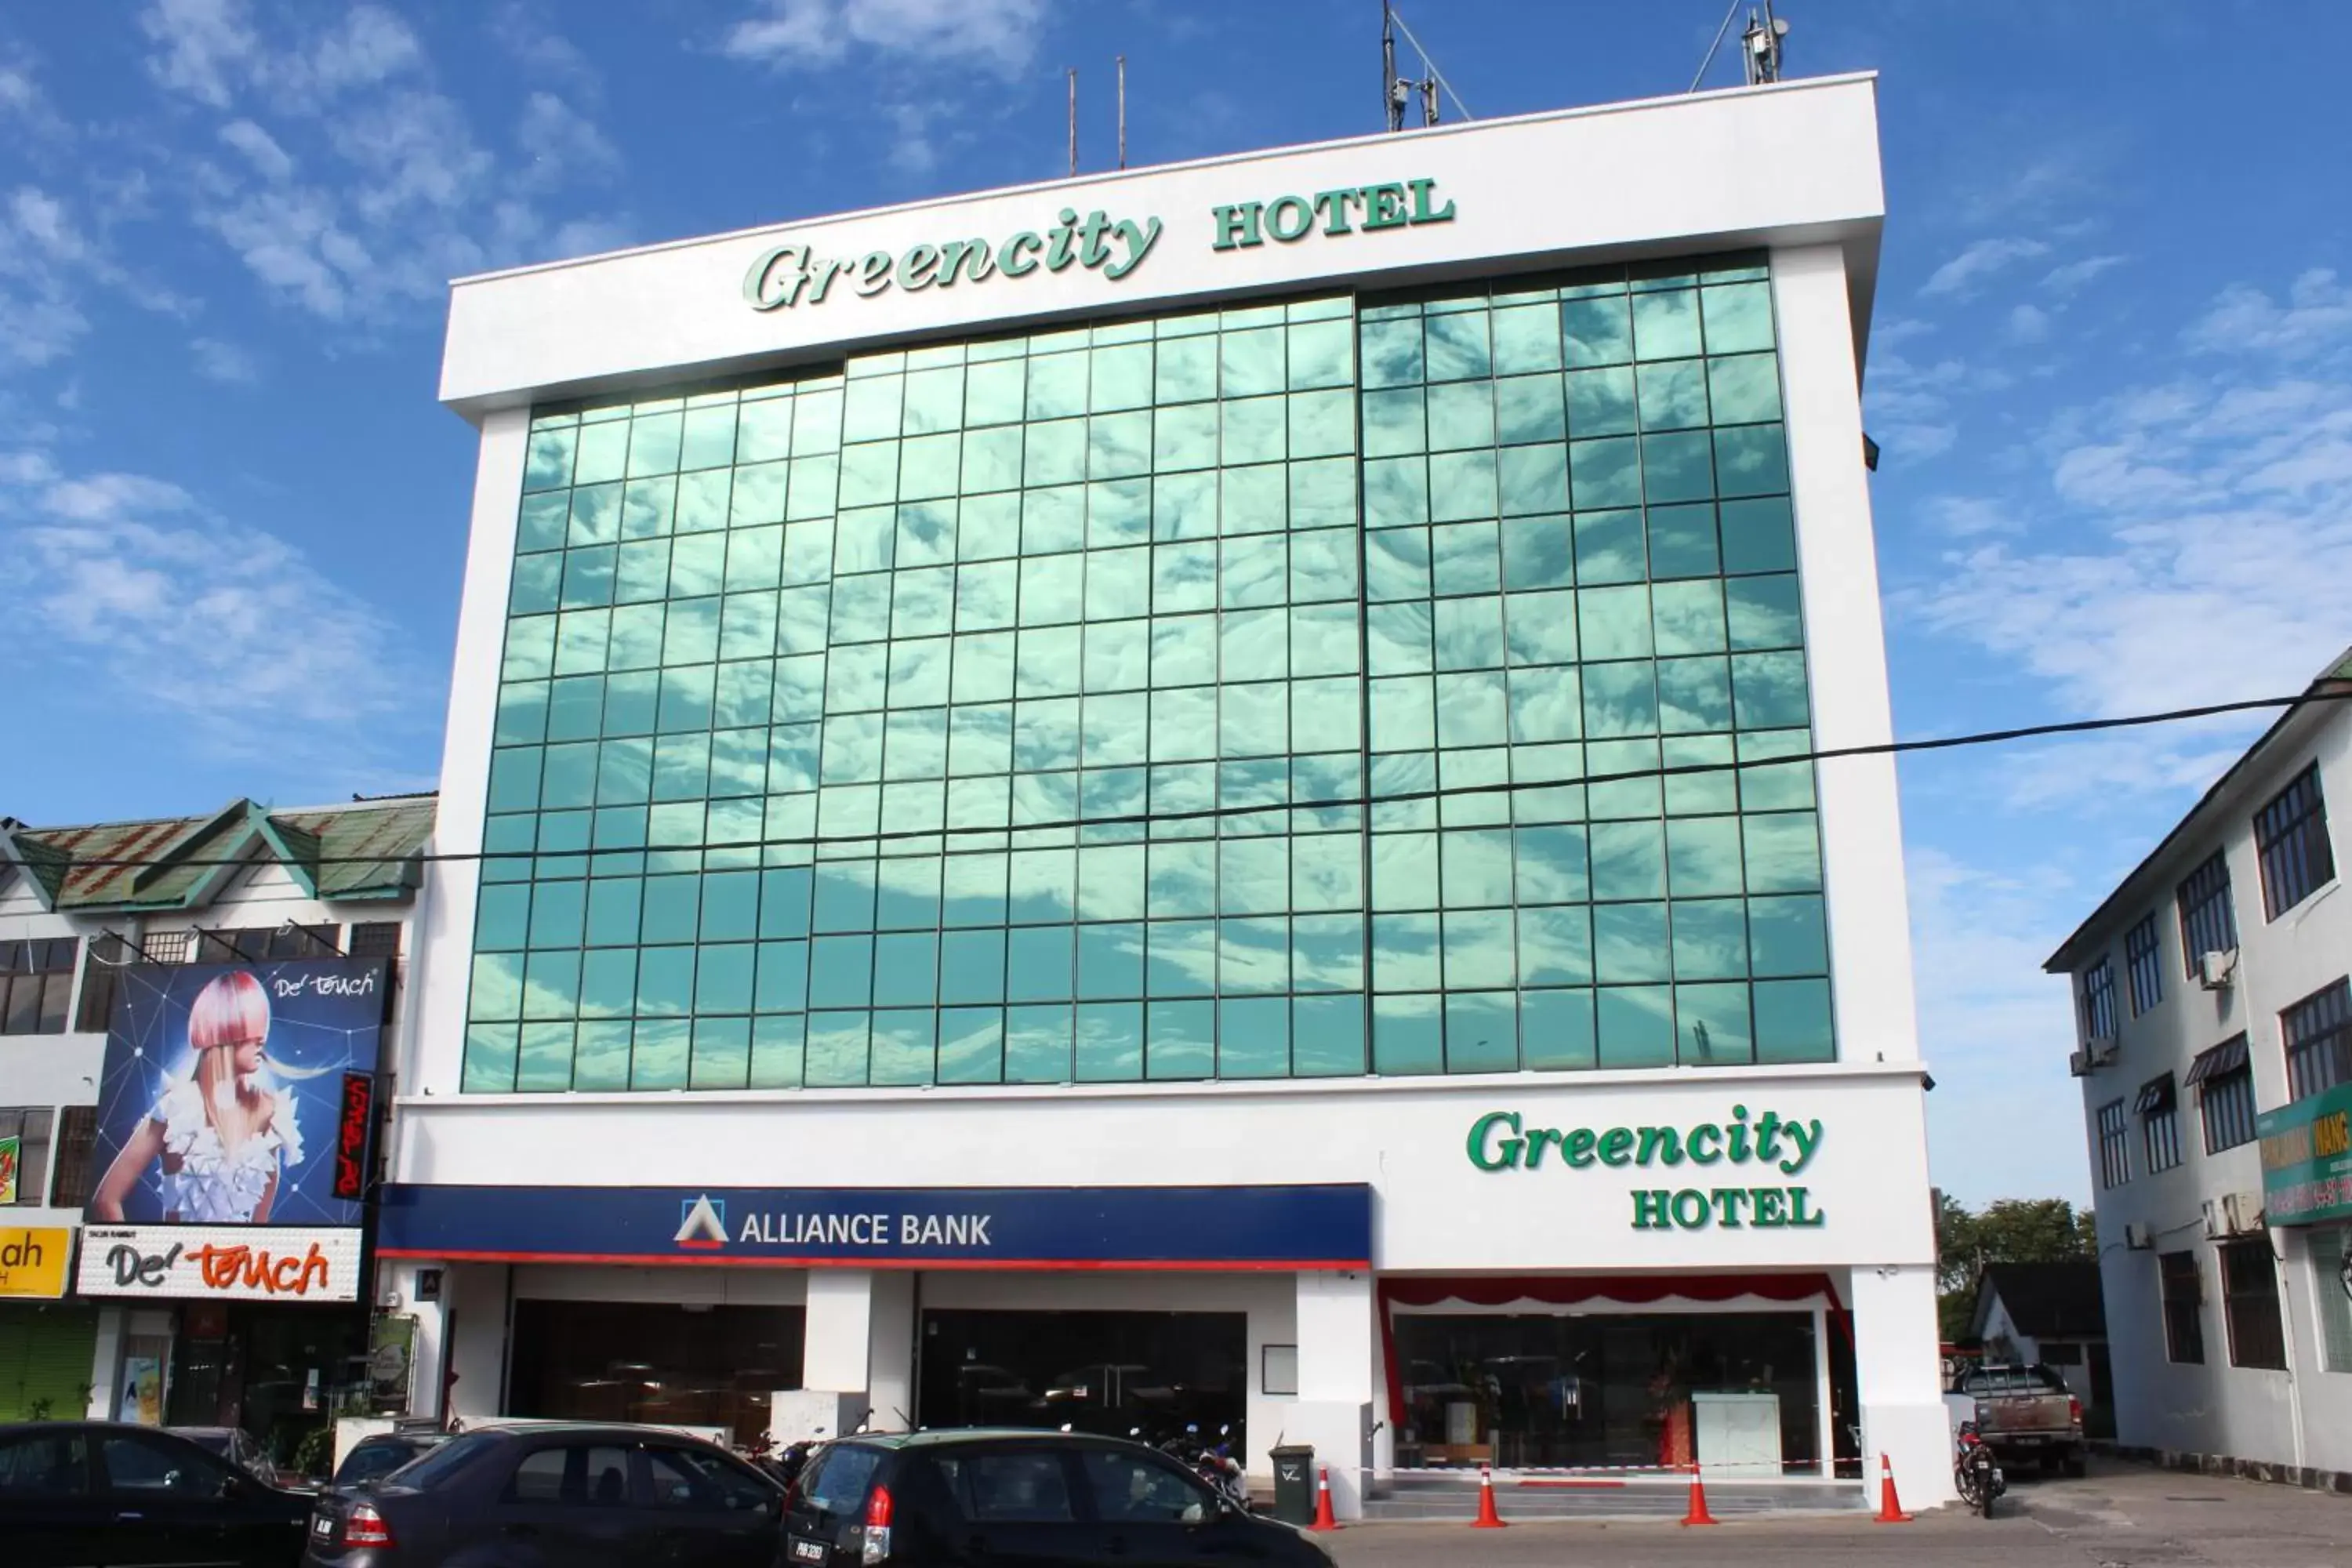 Property Building in Greencity Hotel